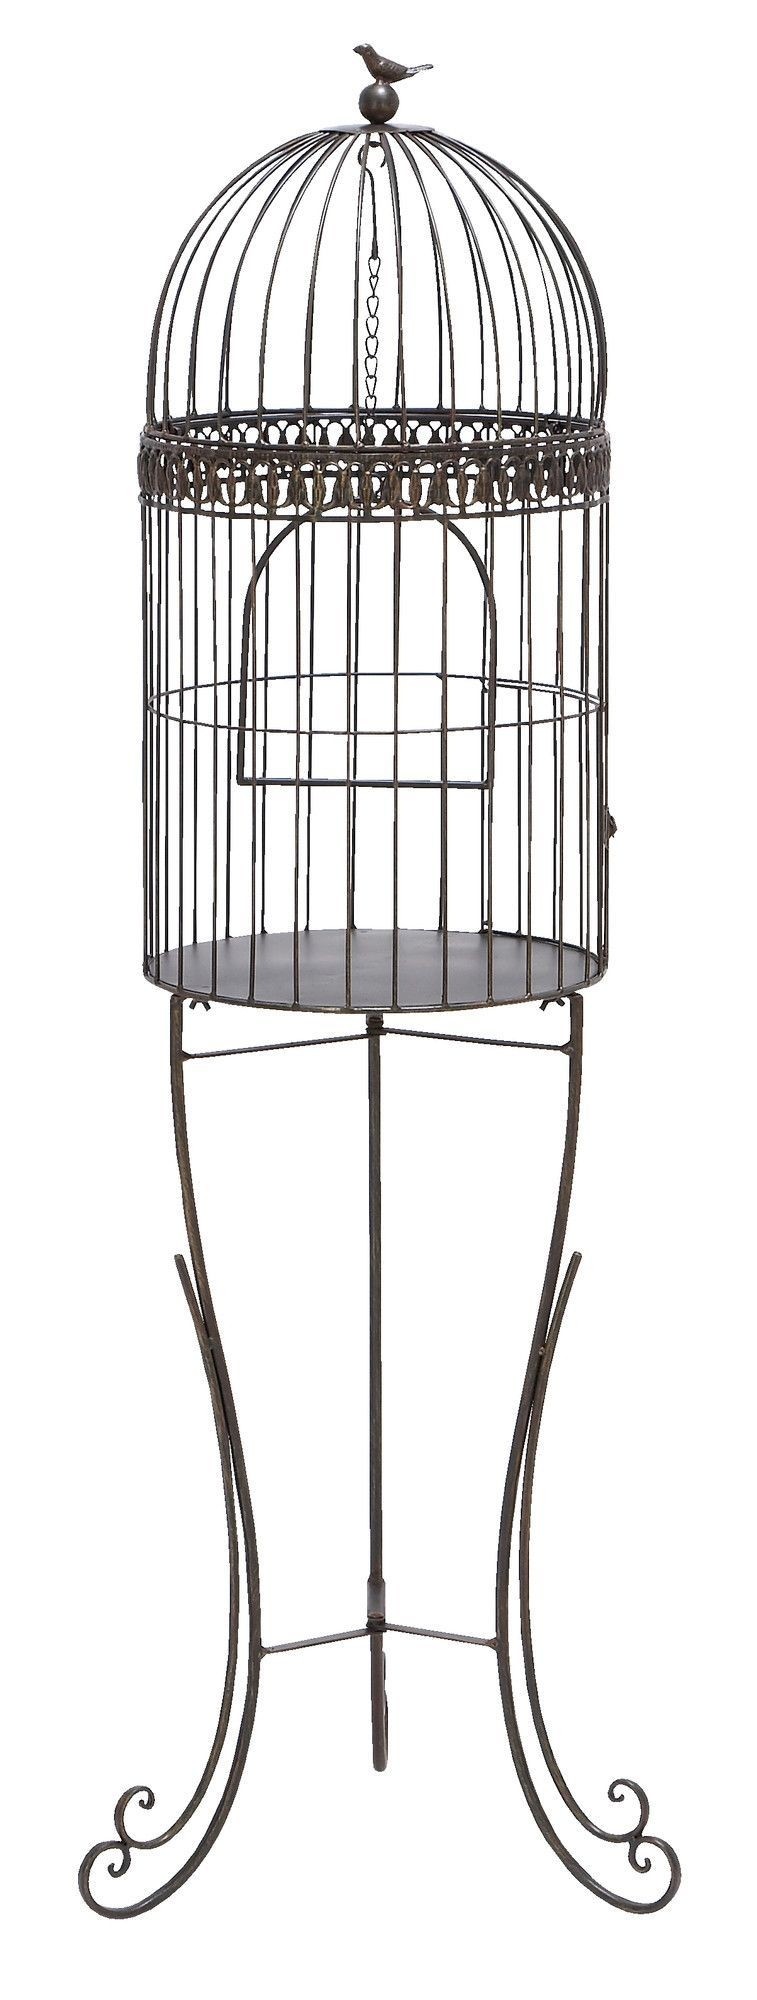 Deco 79 41392 Metal Bird Cage Stand, 13 by 53-Inch